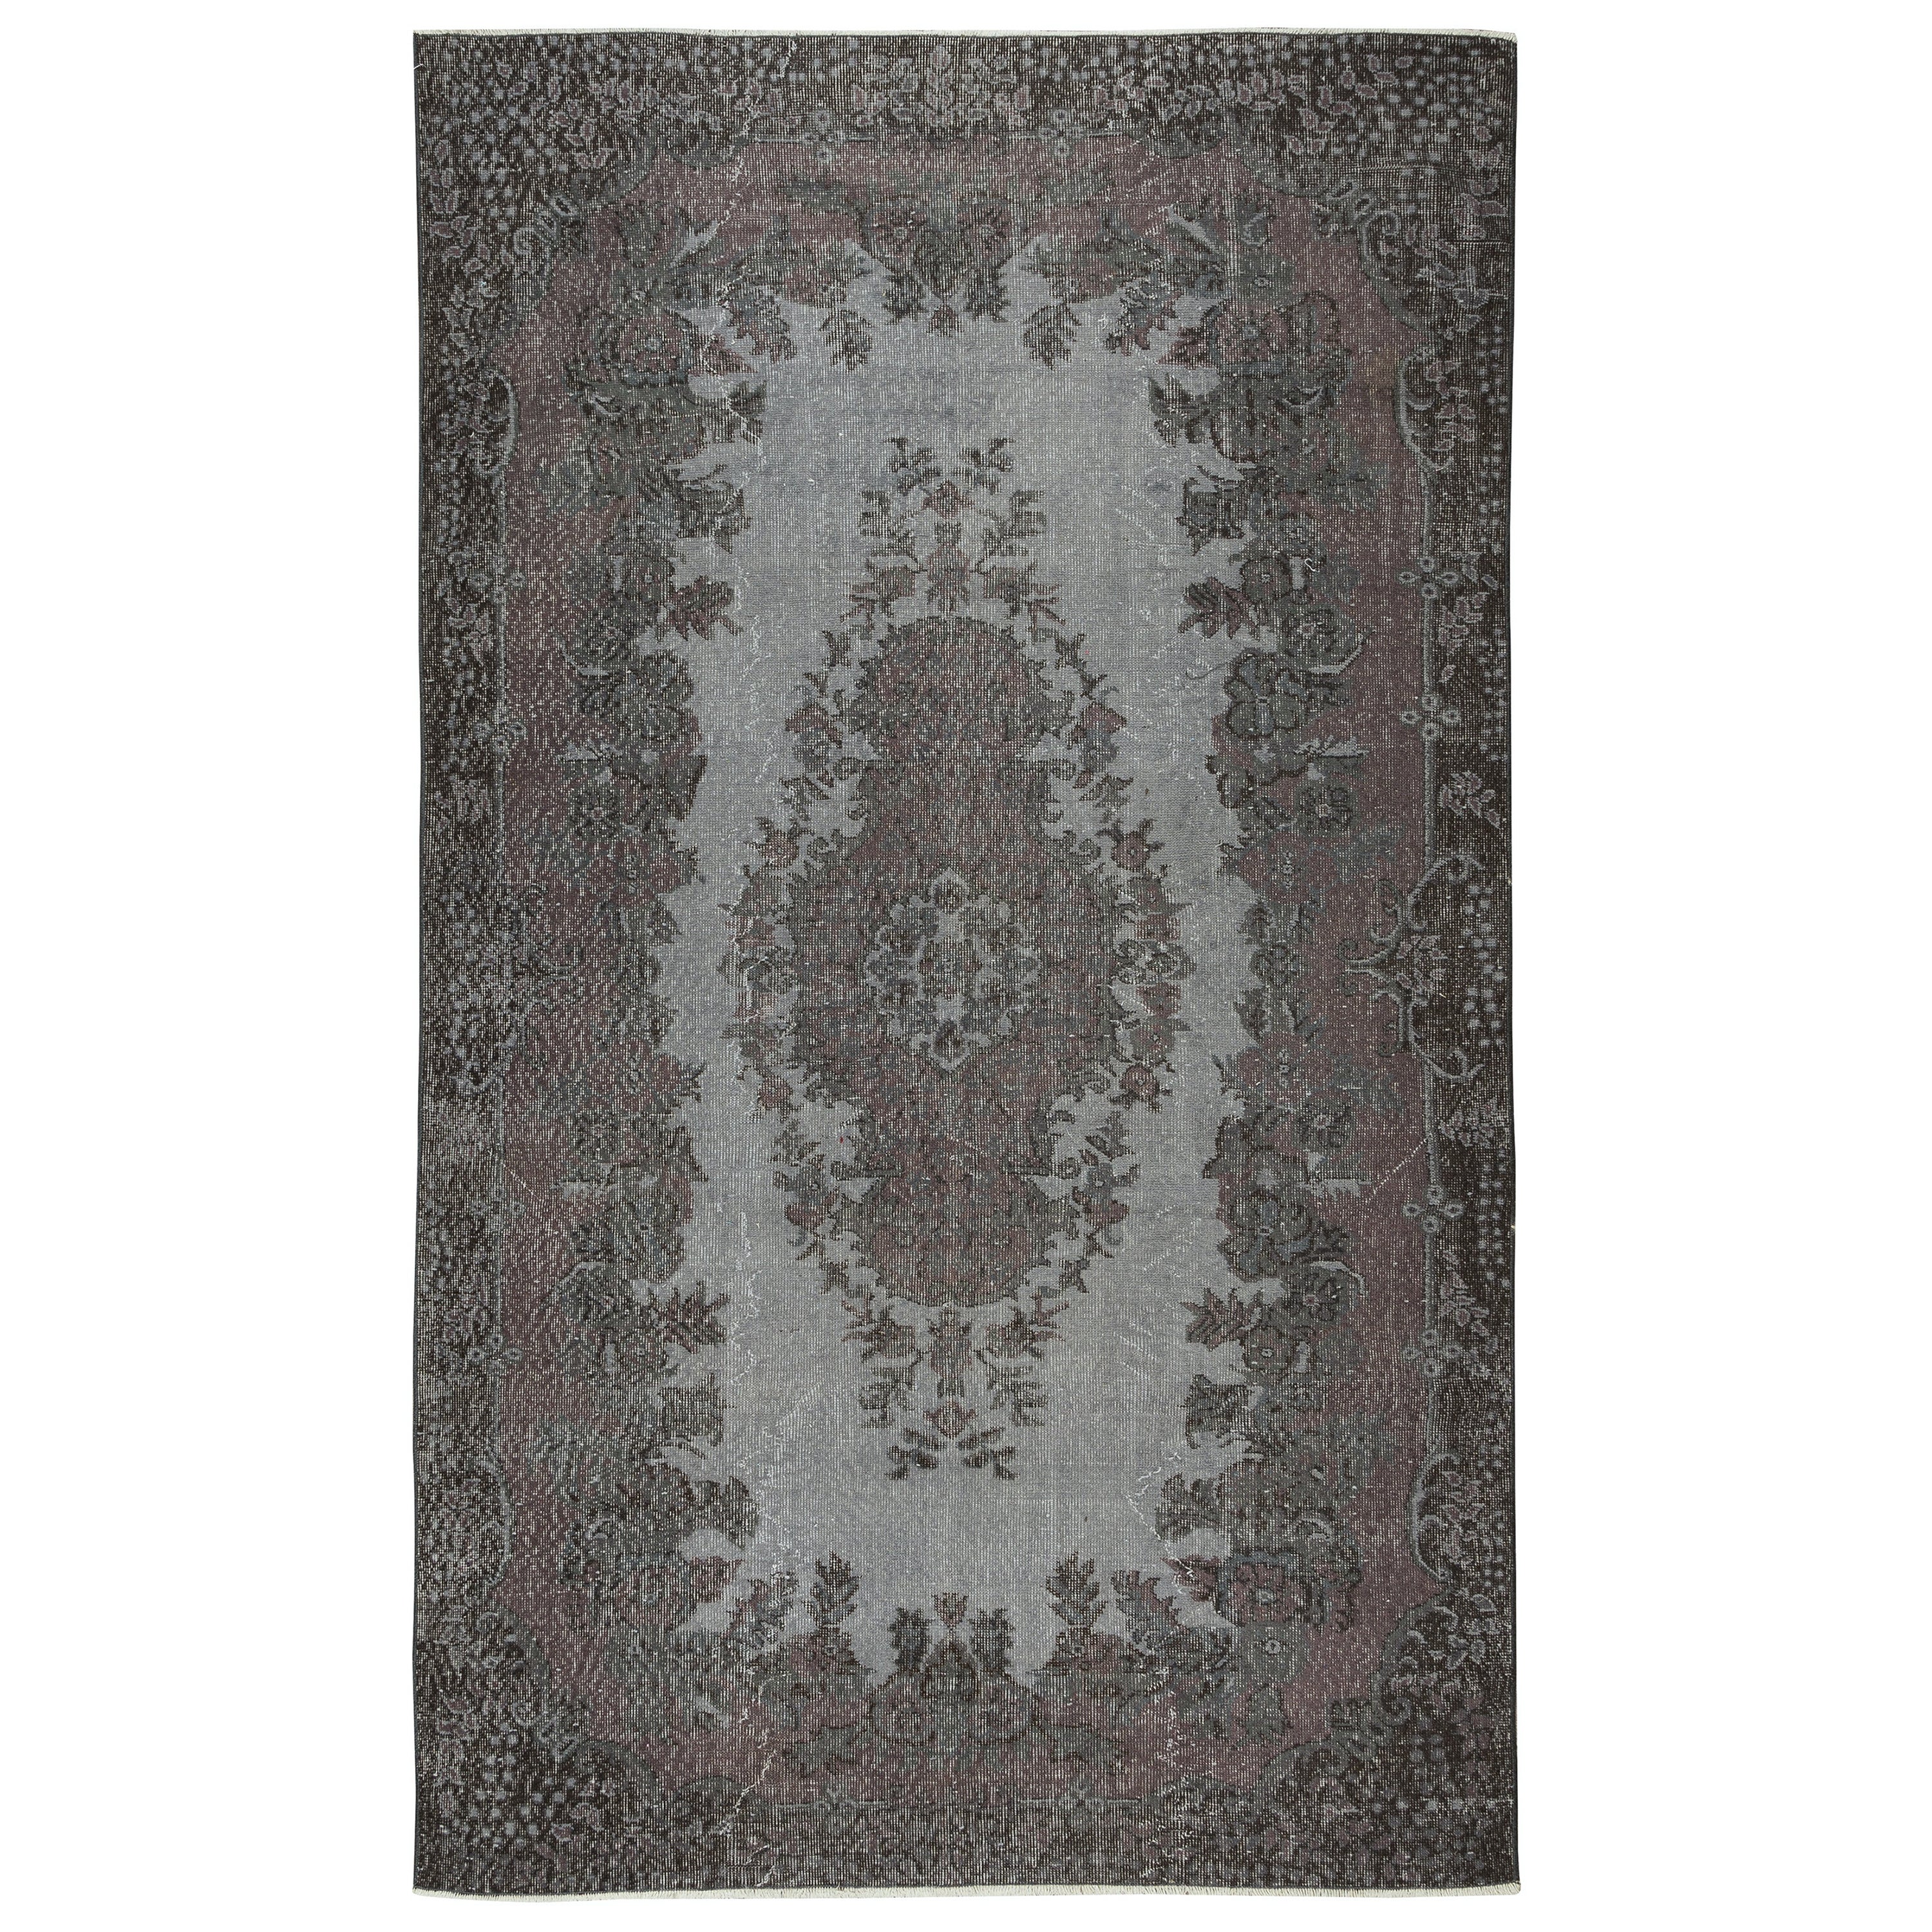 6x10 Ft Decorative Wool Area Rug in Gray and Black, Handmade in Turkey For Sale